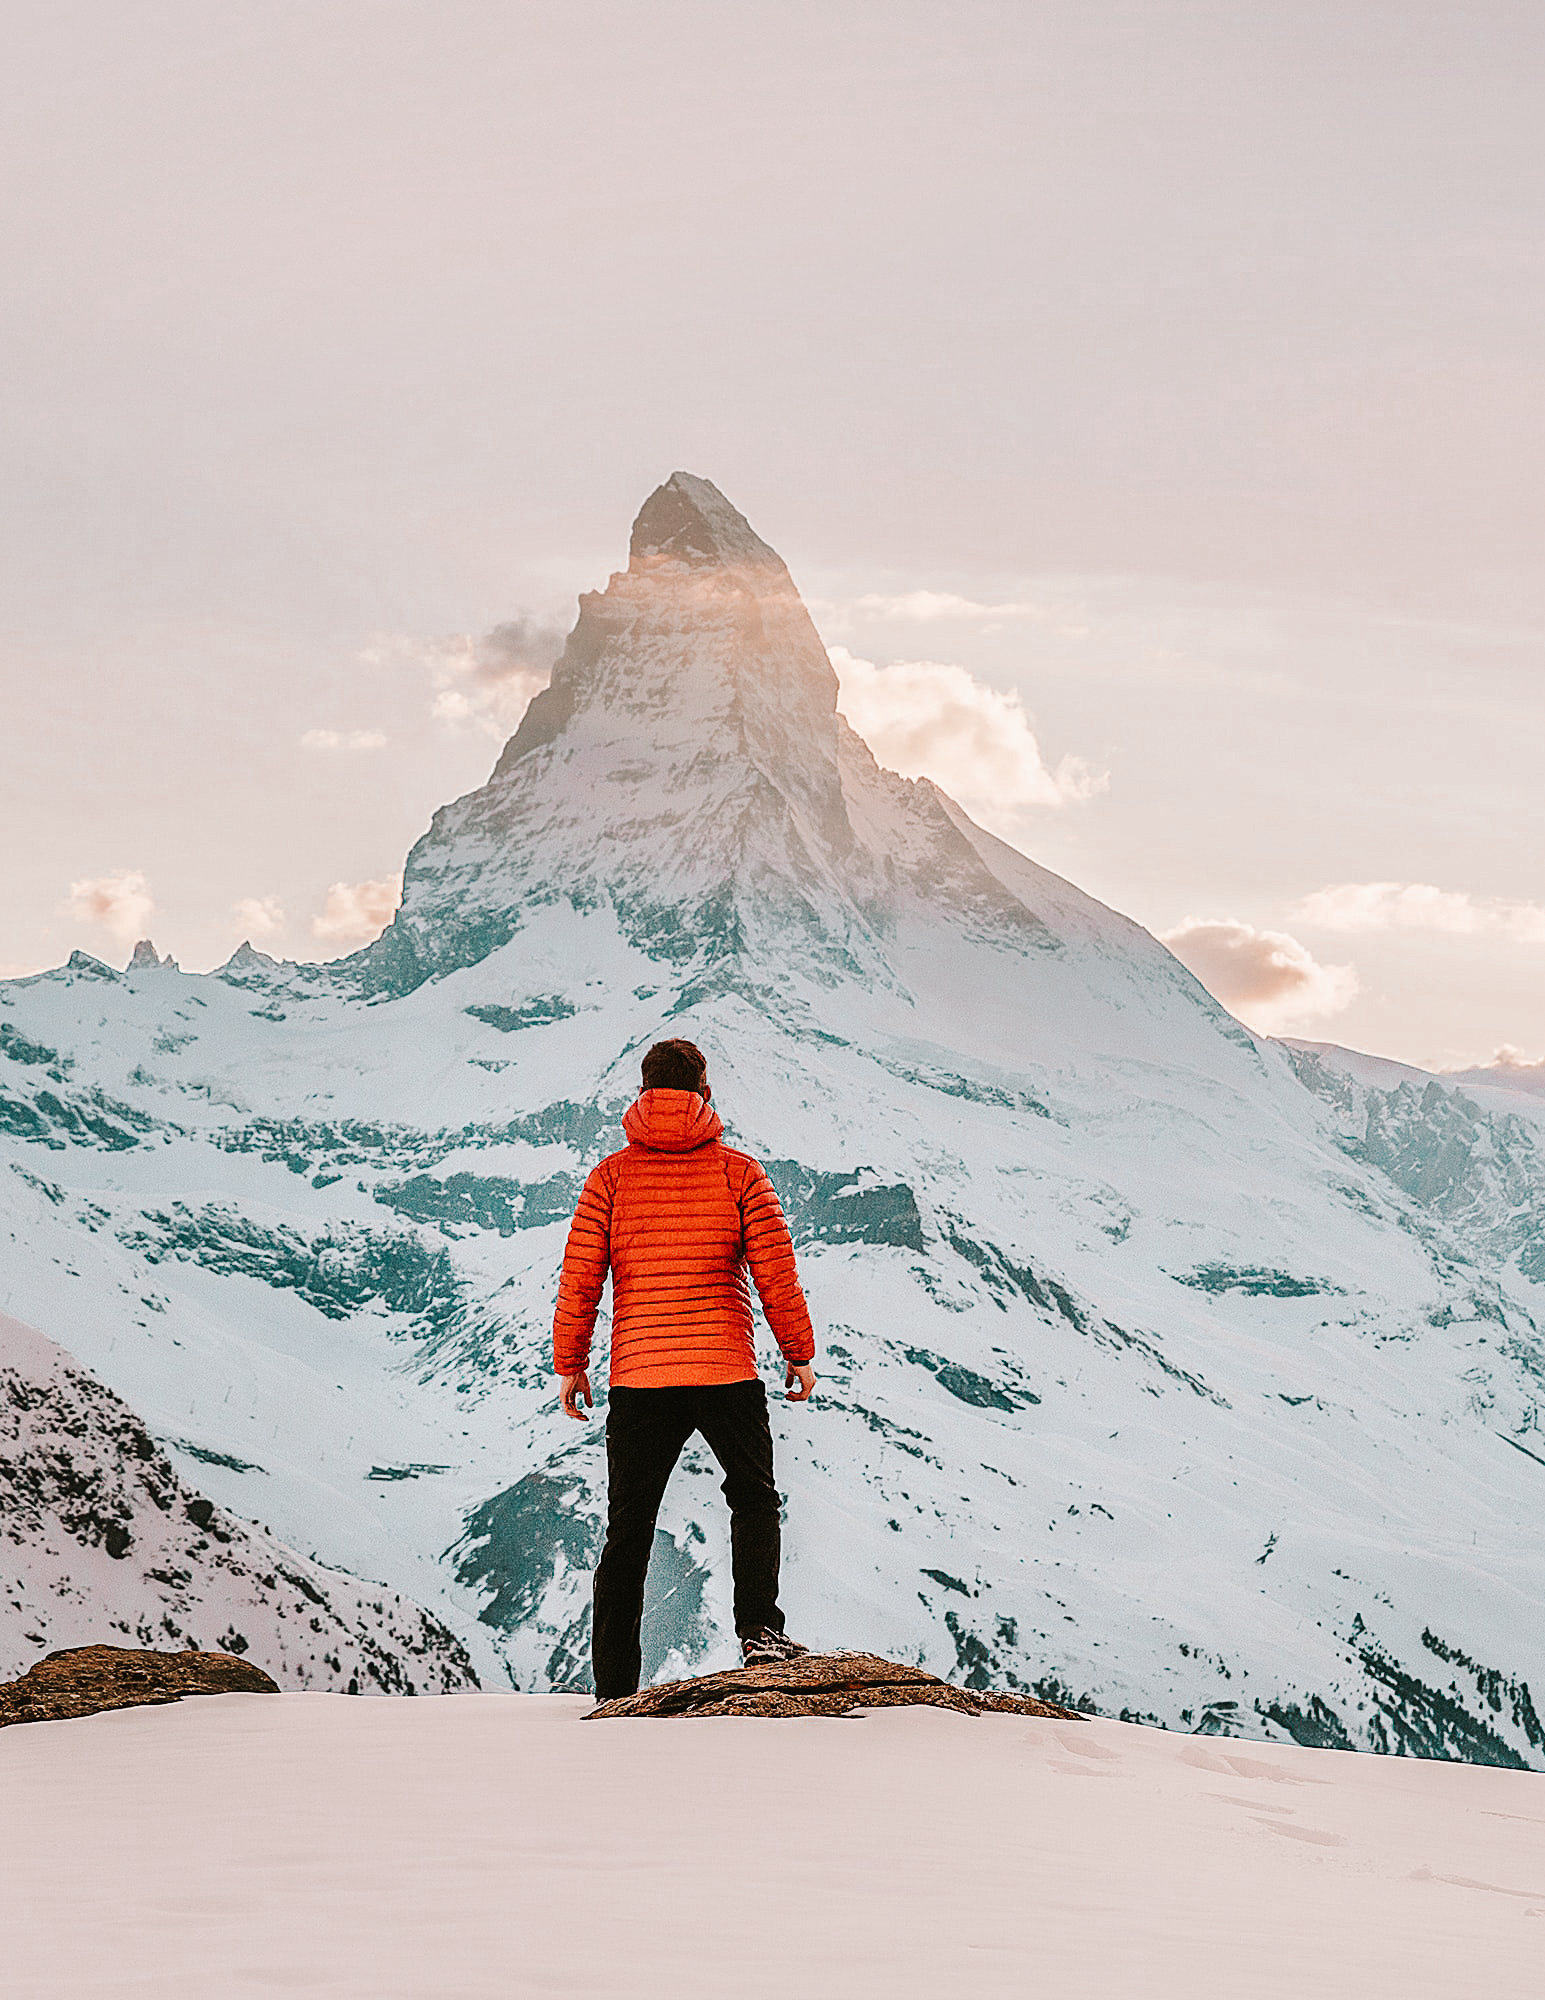 A man in a red jacket standing in front of the Matterhorn near Zermatt in winter. There is snow everywhere and soft sunlight.